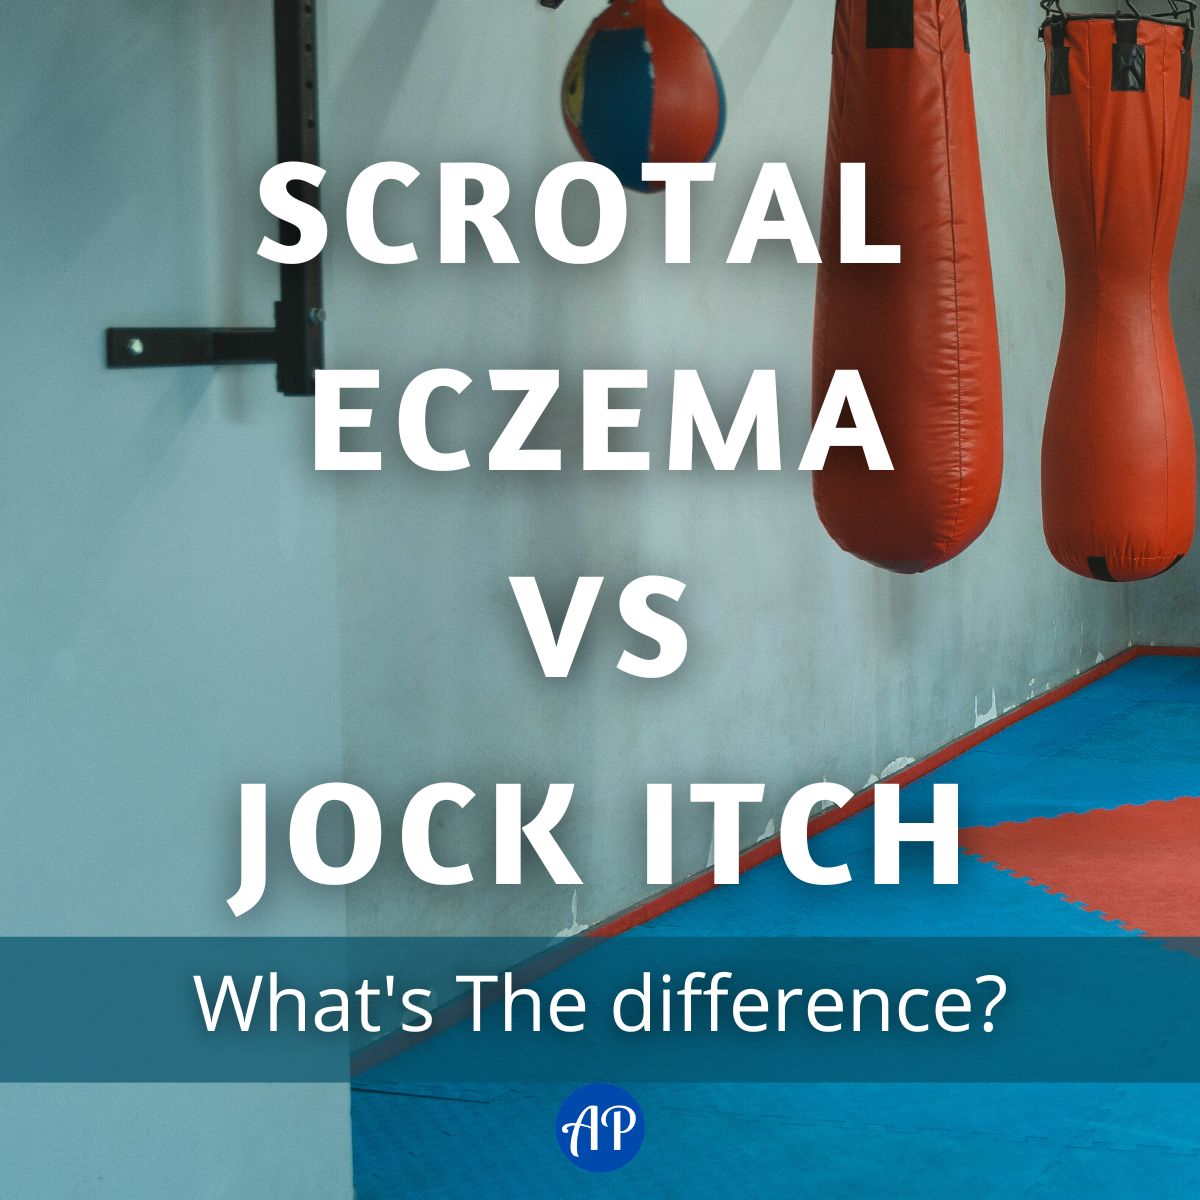 Scrotal Eczema vs Jock Itch: What’s The Difference?